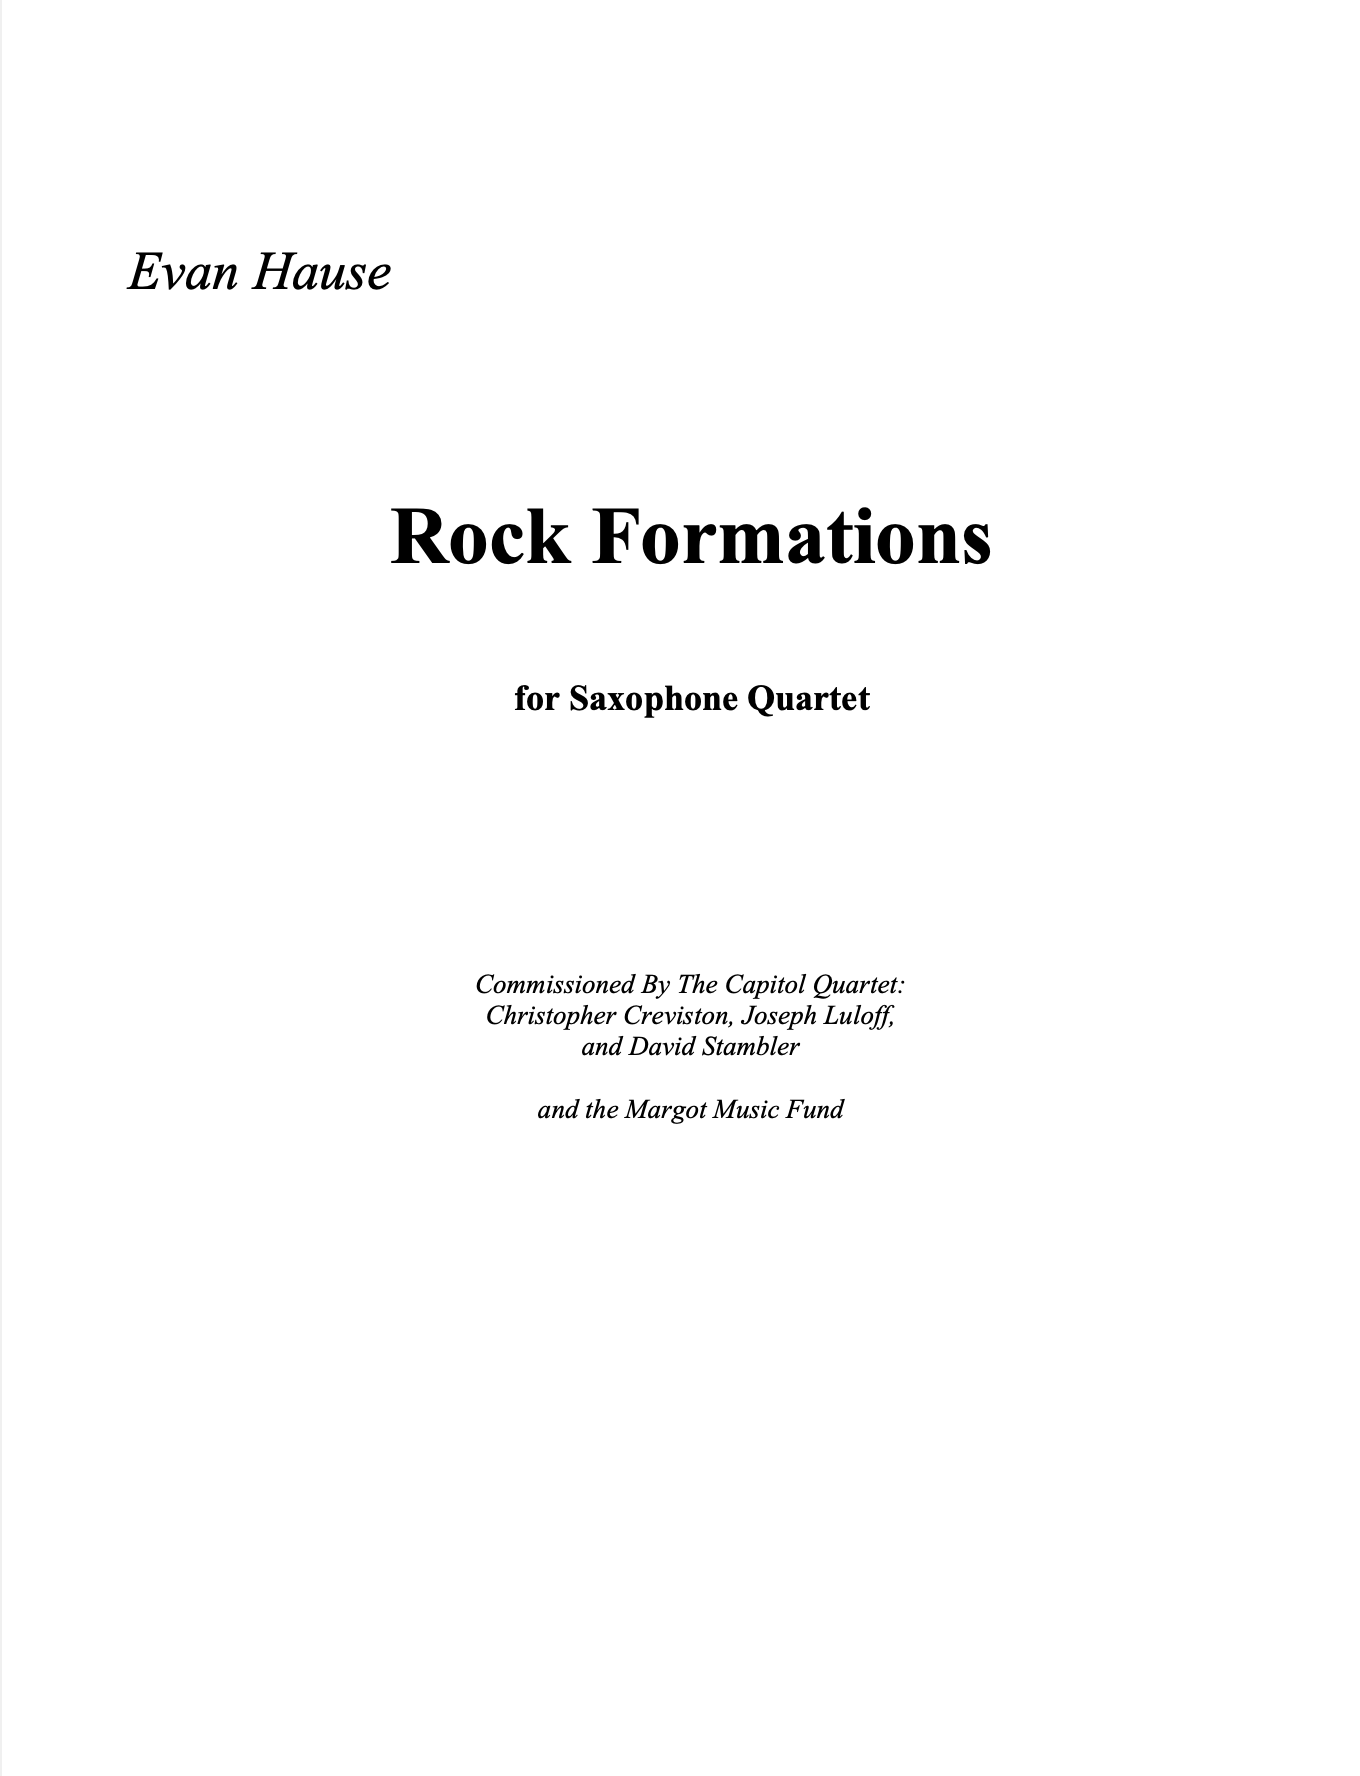 Rock Formations by Evan Hause